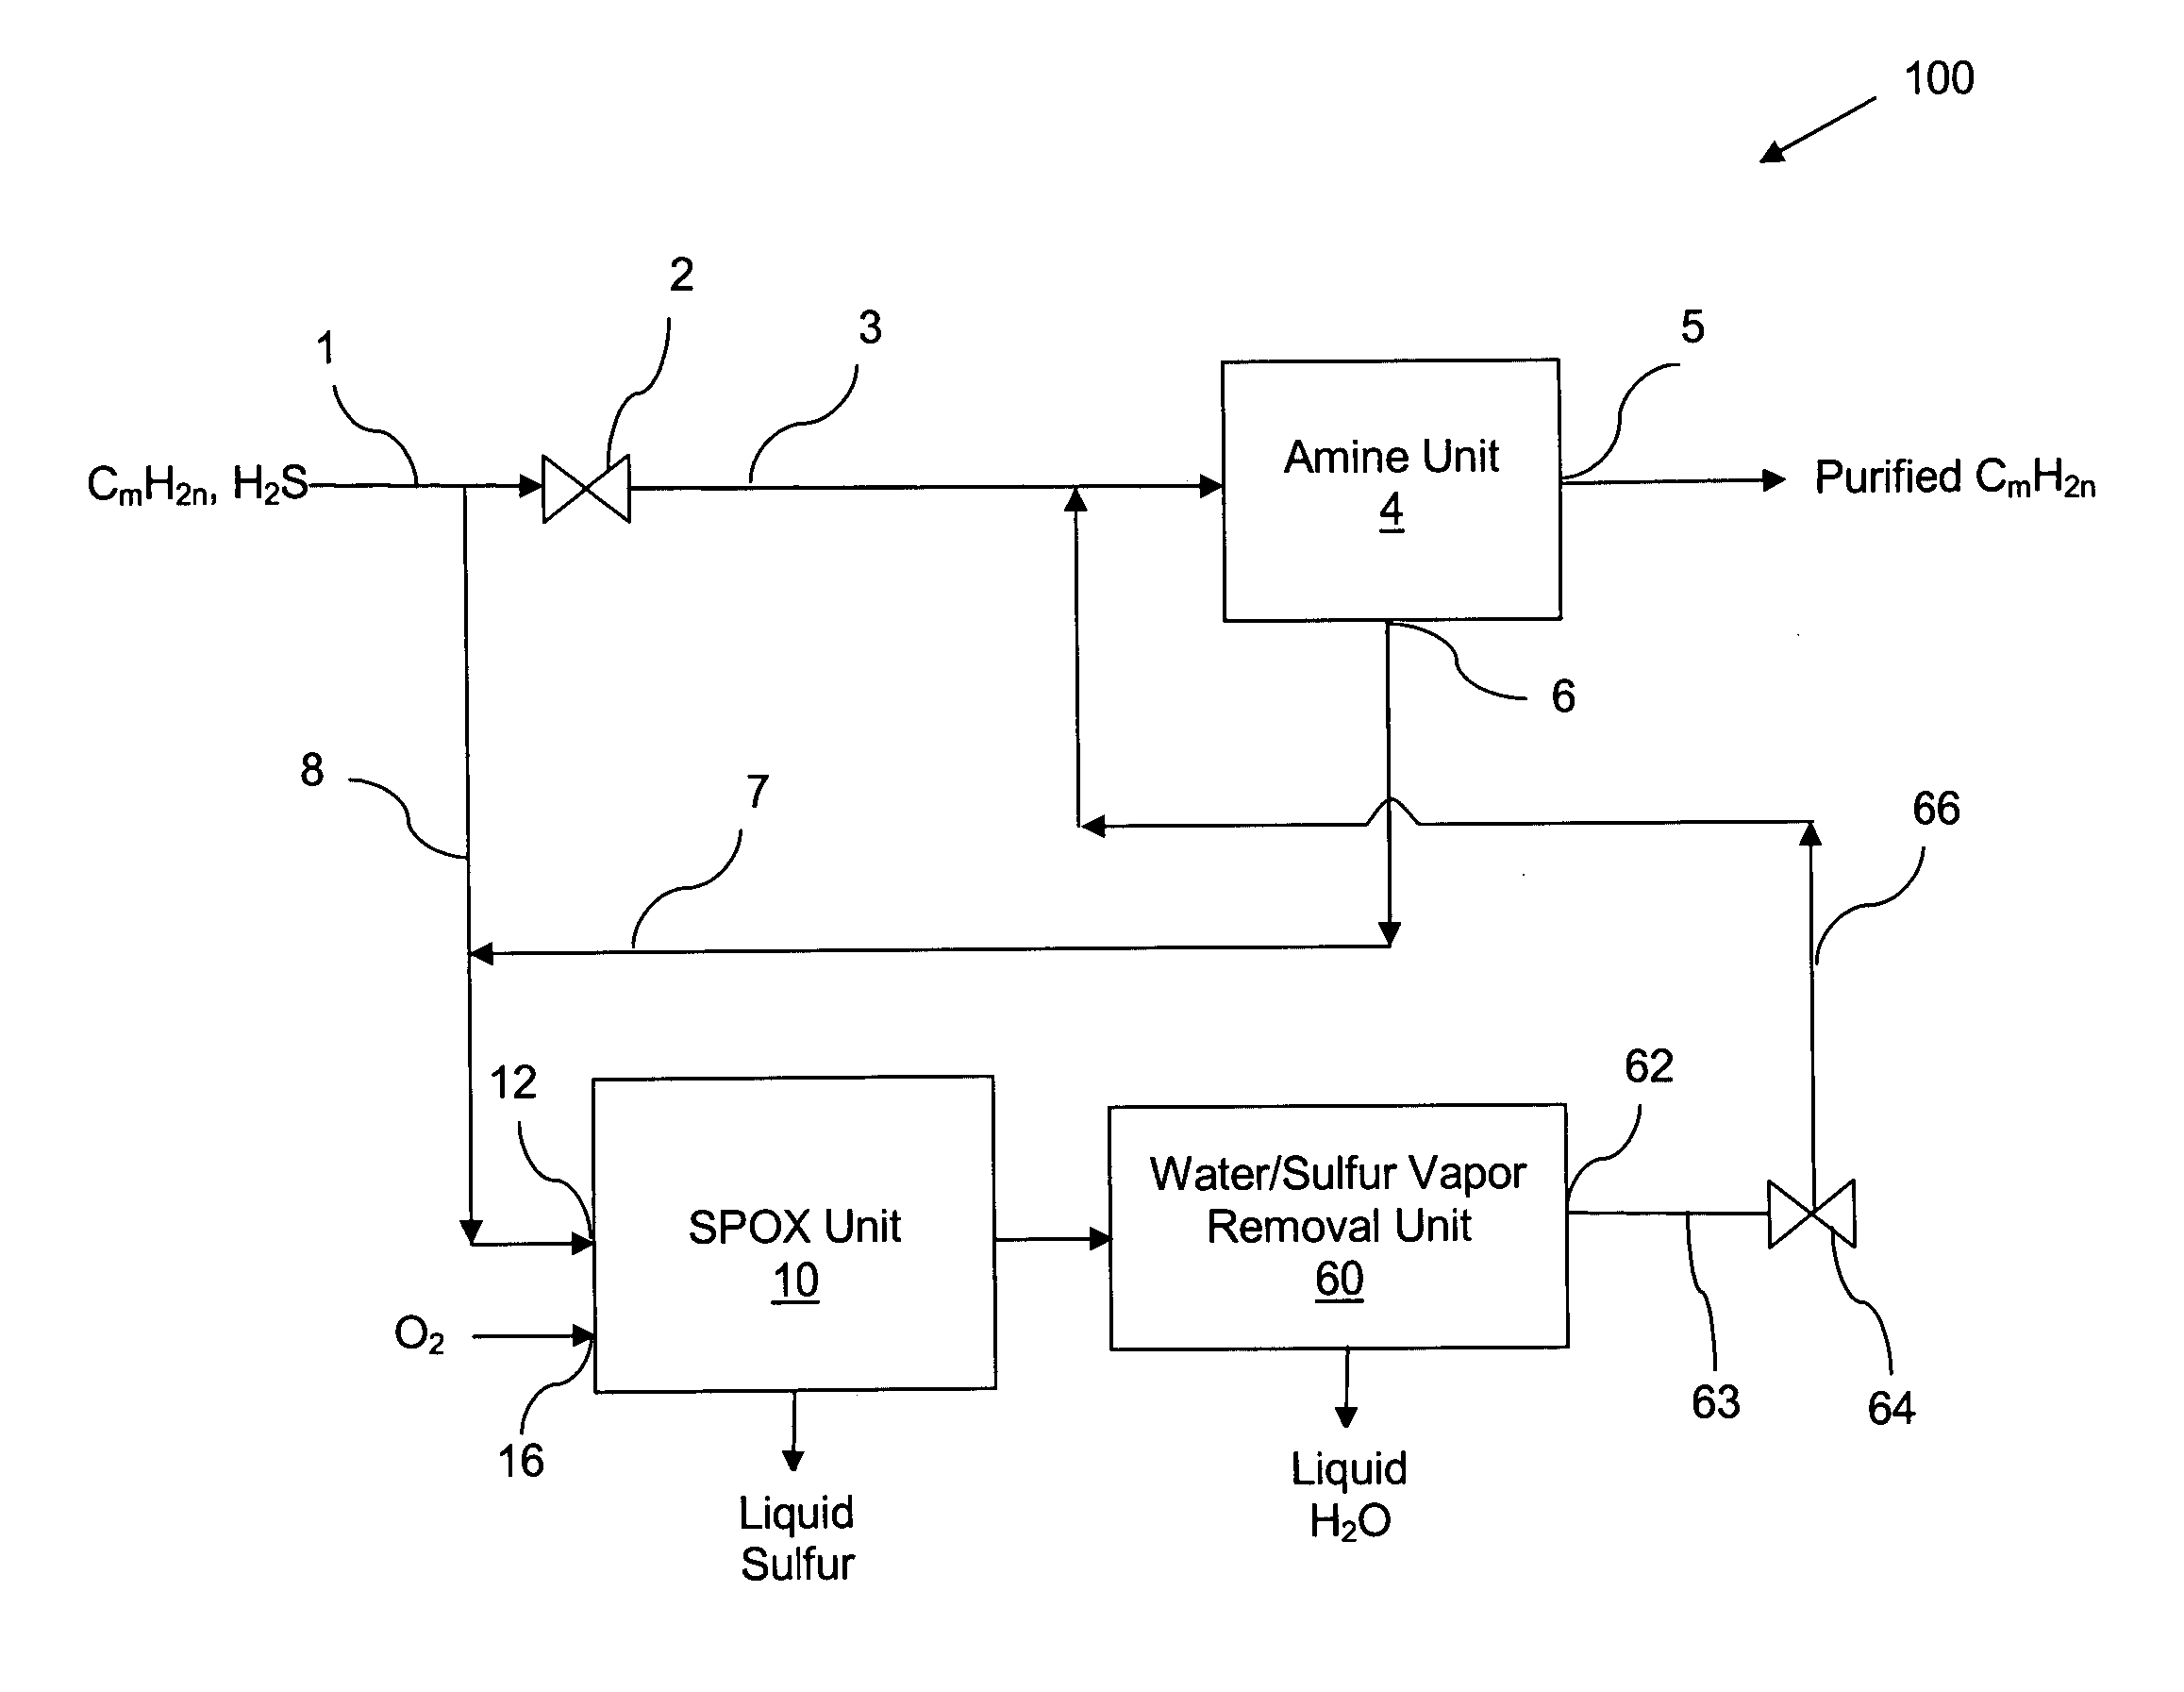 Apparatus and catalytic partial oxidation process for recovering sulfur from an H2S-containing gas stream